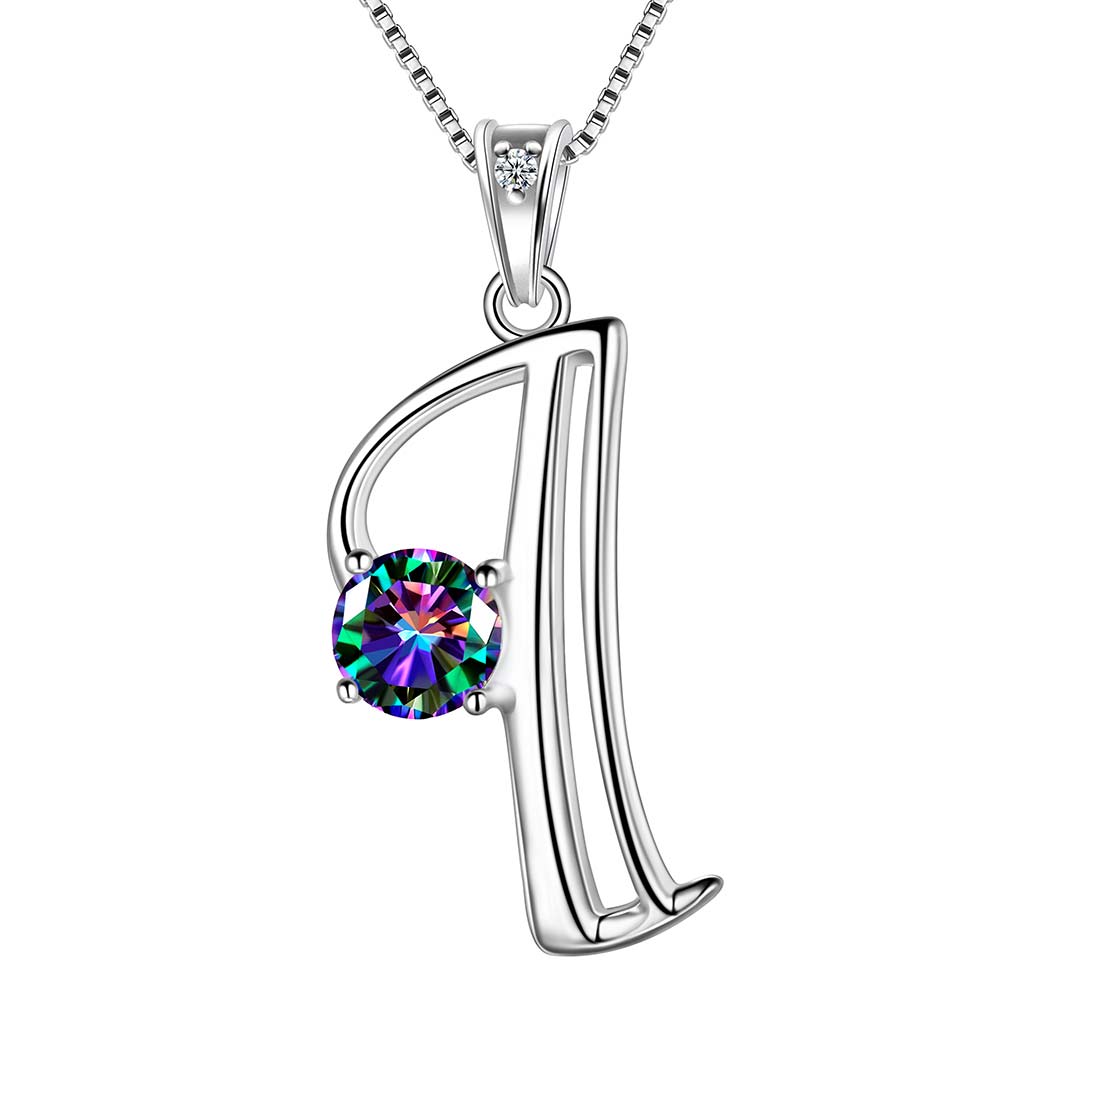 Women Letter I Initial Necklaces Sterling Silver - Necklaces - Aurora Tears Jewelry